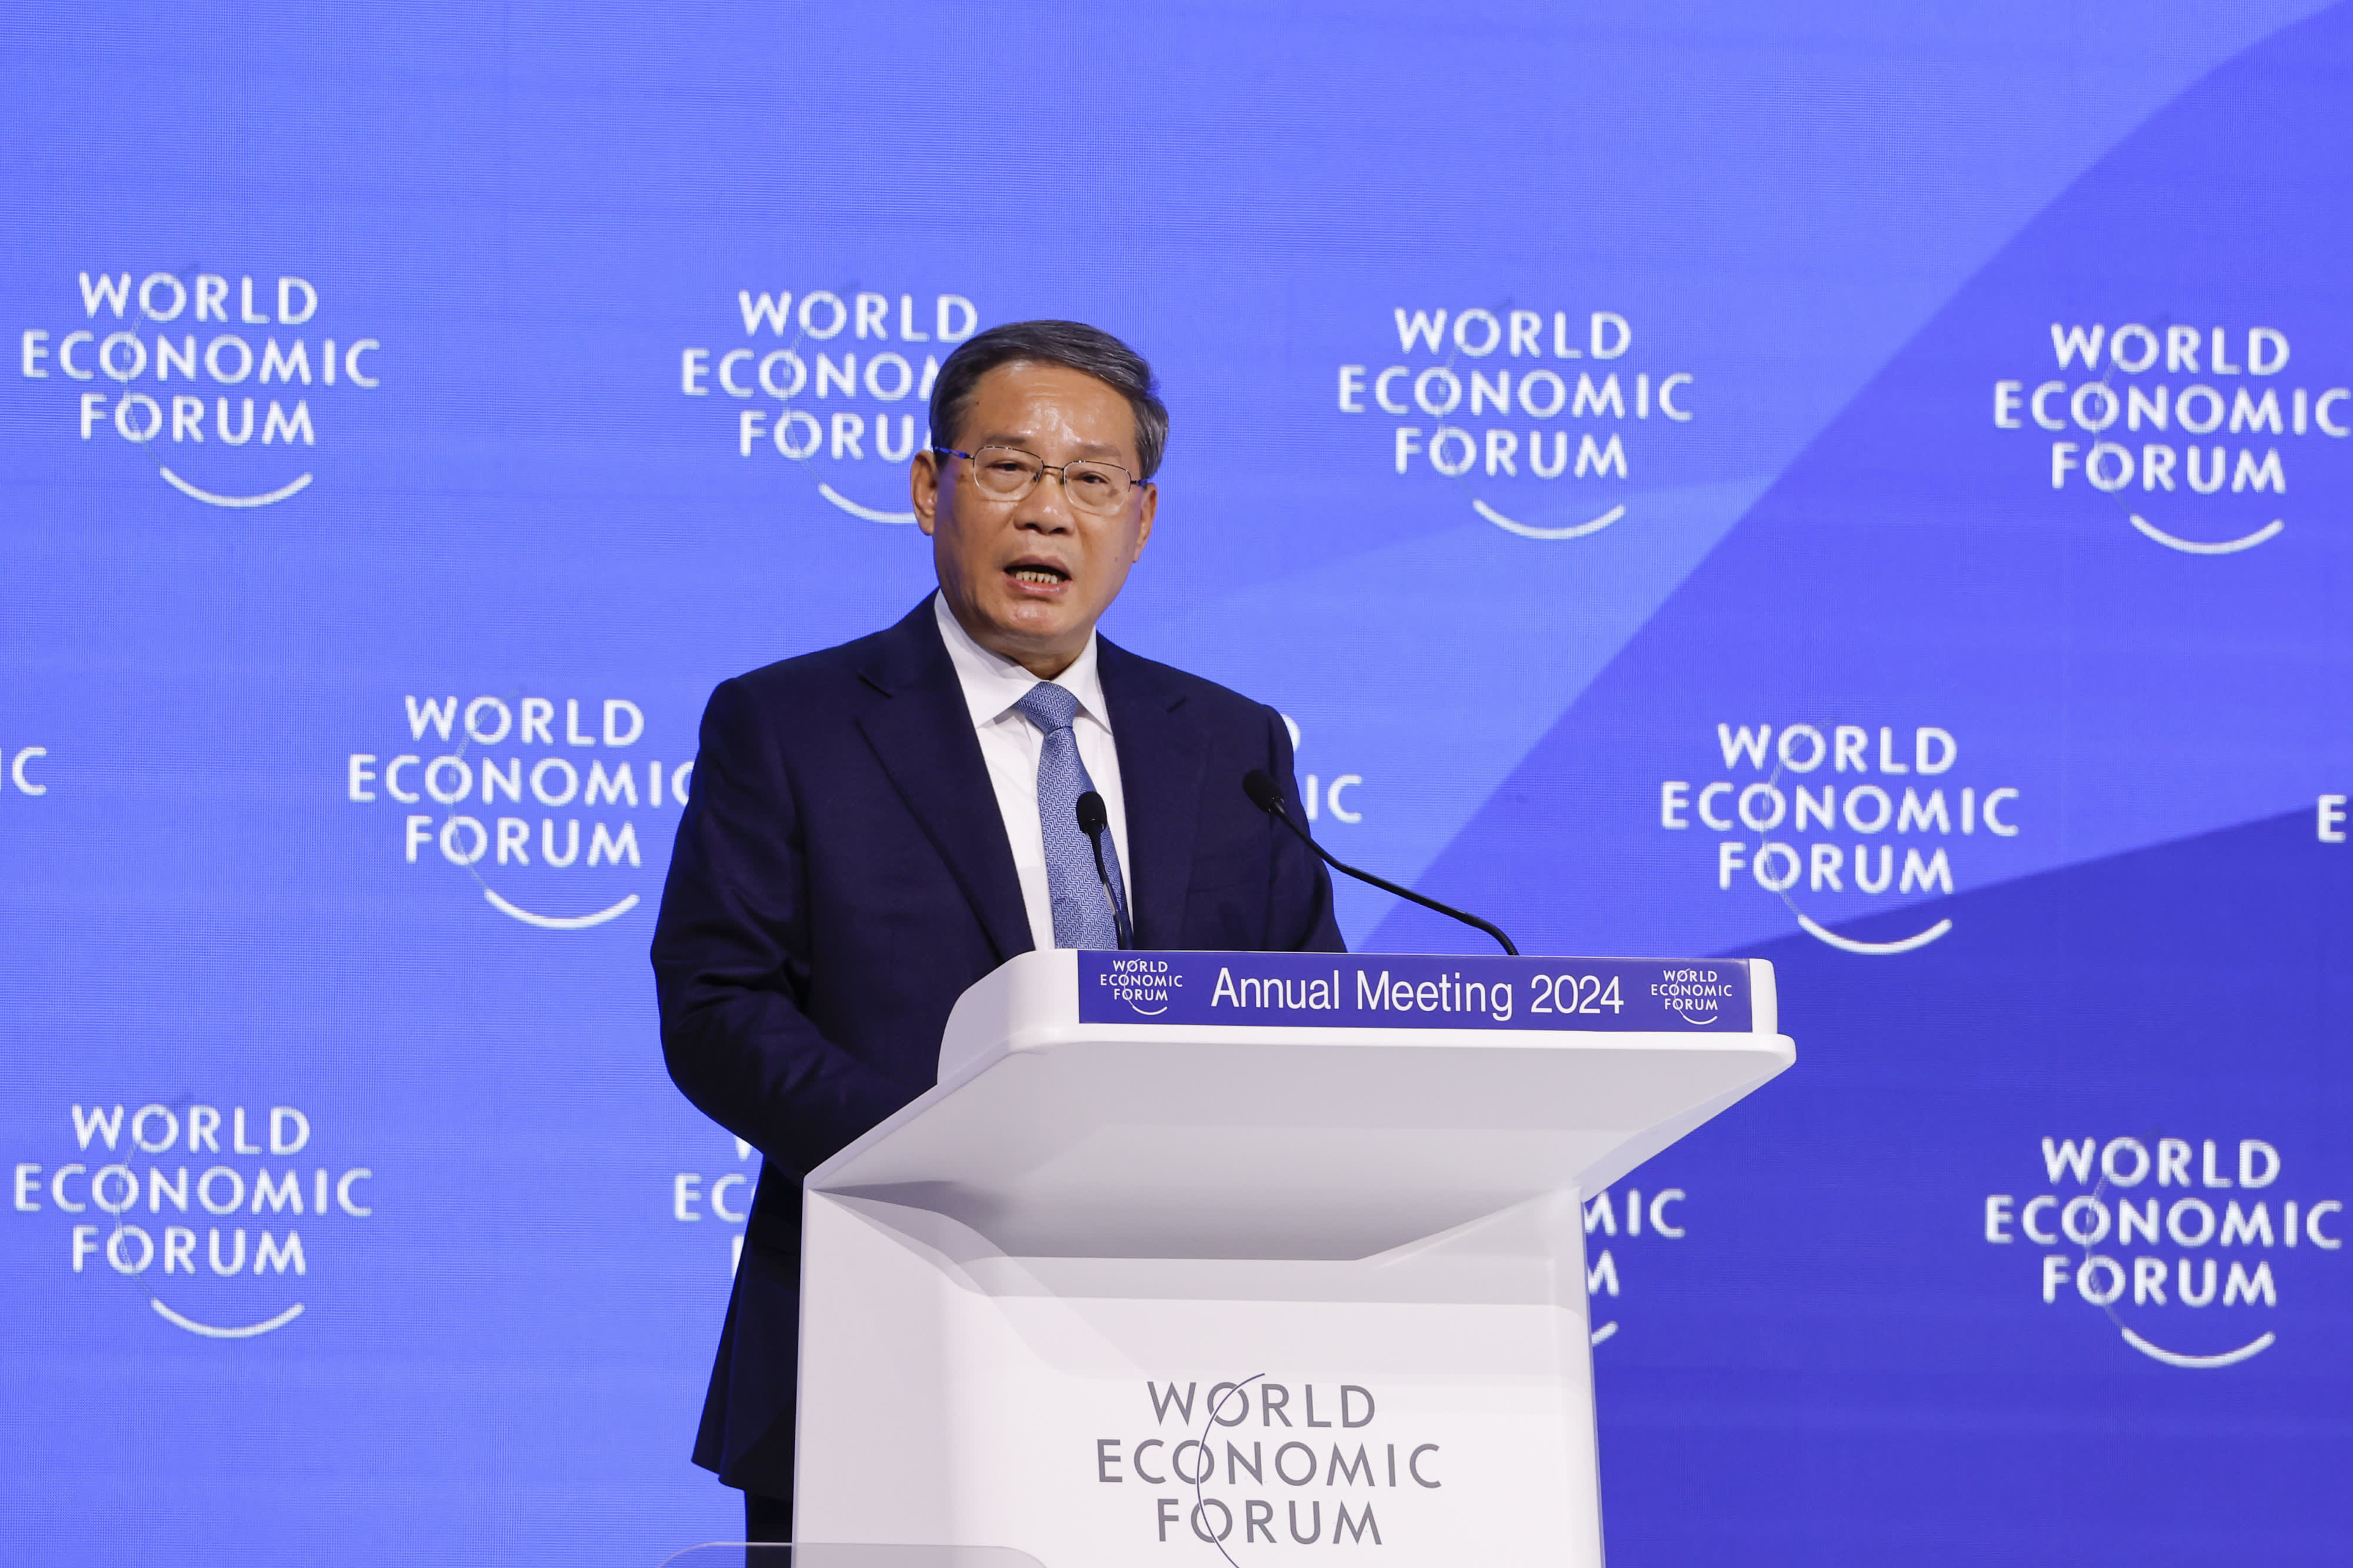 China’s premier tells Davos that innovation shouldn’t be used to restrict other nations